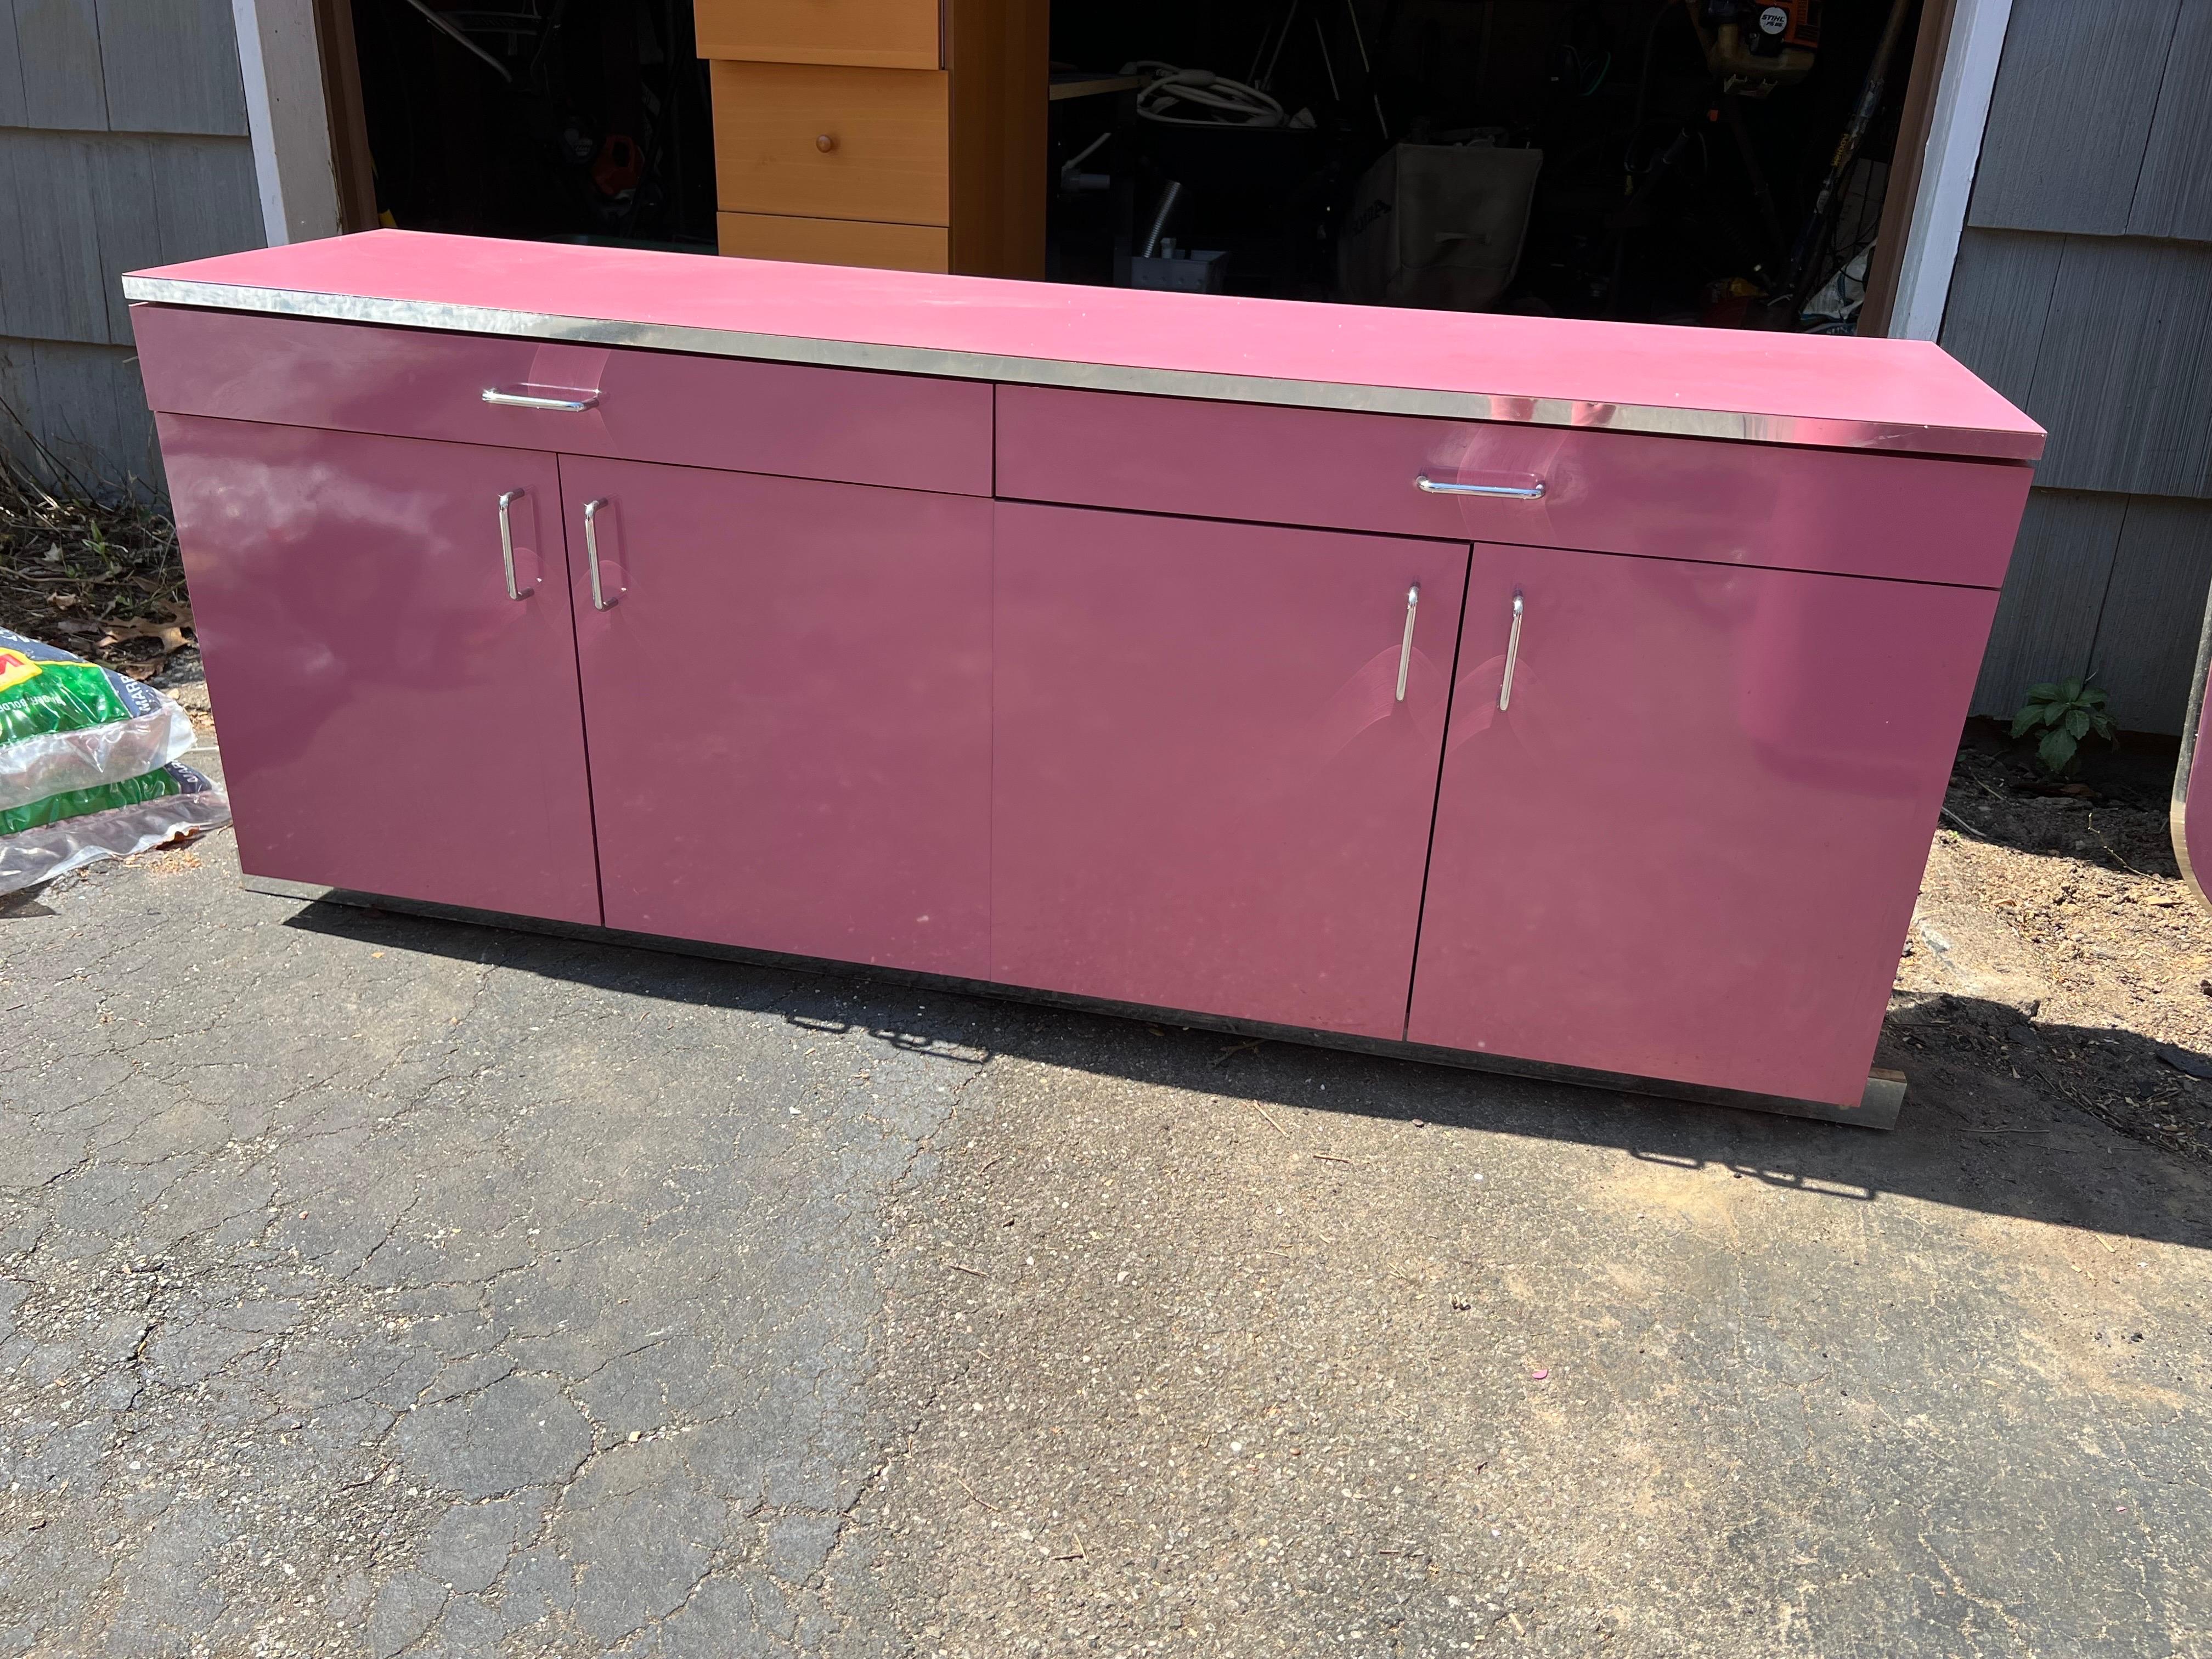 1980 barbie pink chrome cabinet dresser

Custom made by the original owner in 1980. Perfect to use it as a credenza in the living room or a dresser in your bedroom.